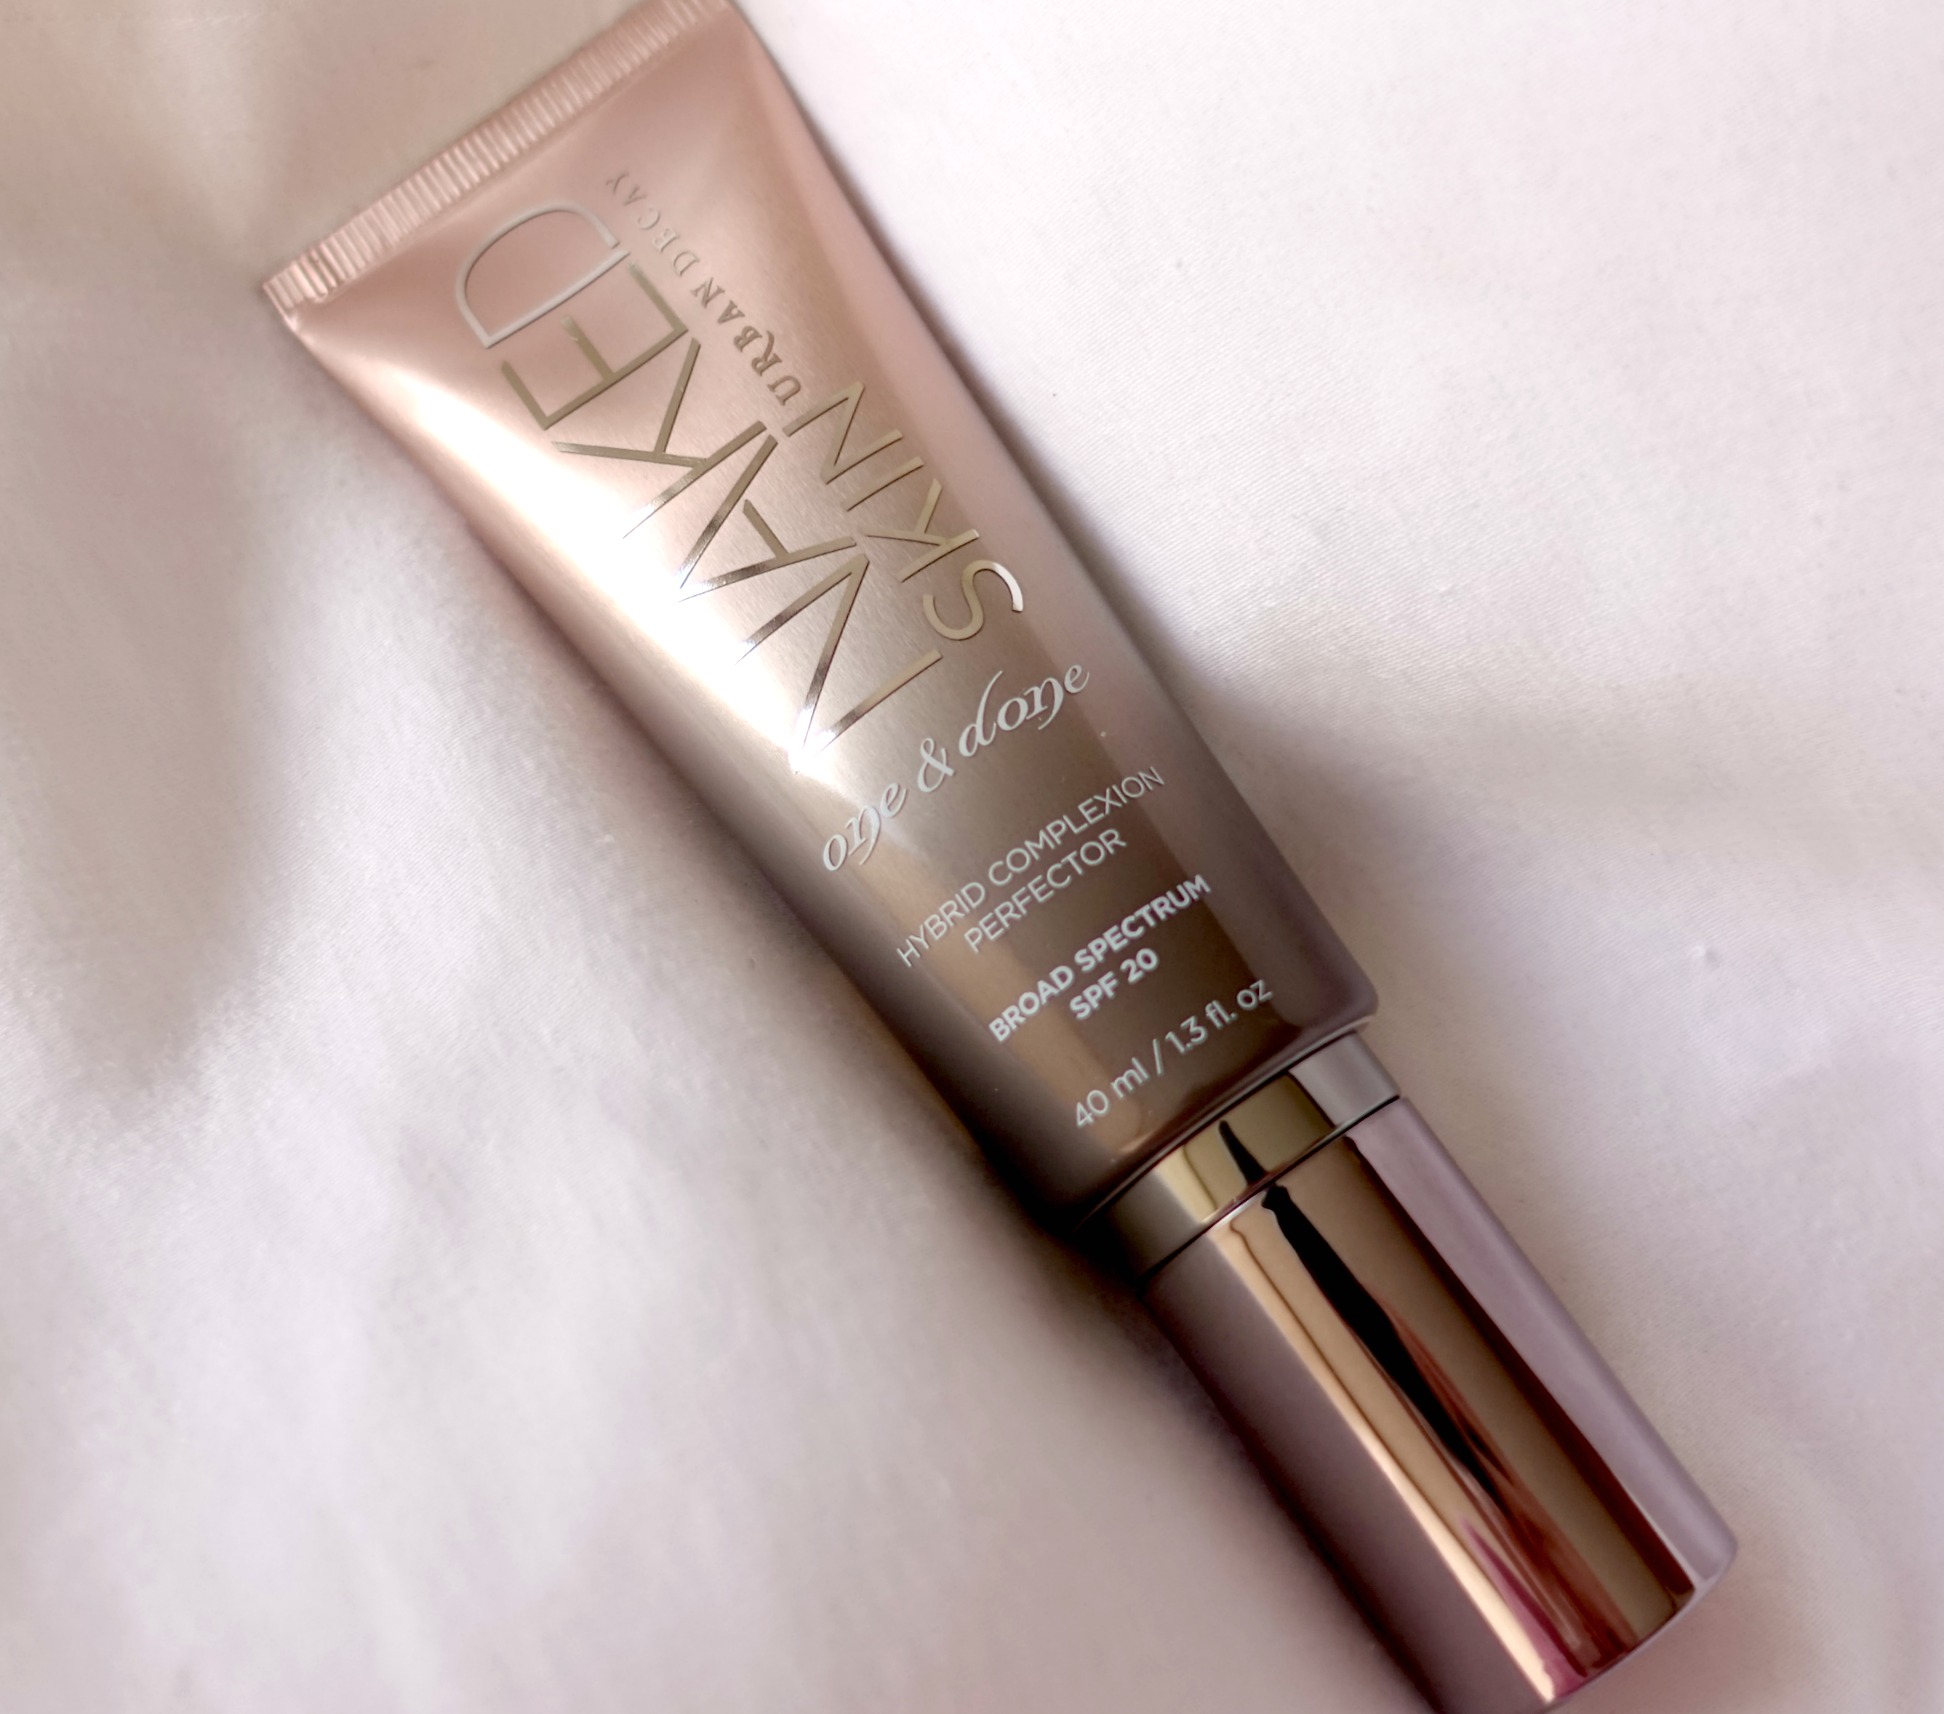 Urban Decay Naked Skin One & Done - A Real Life Review